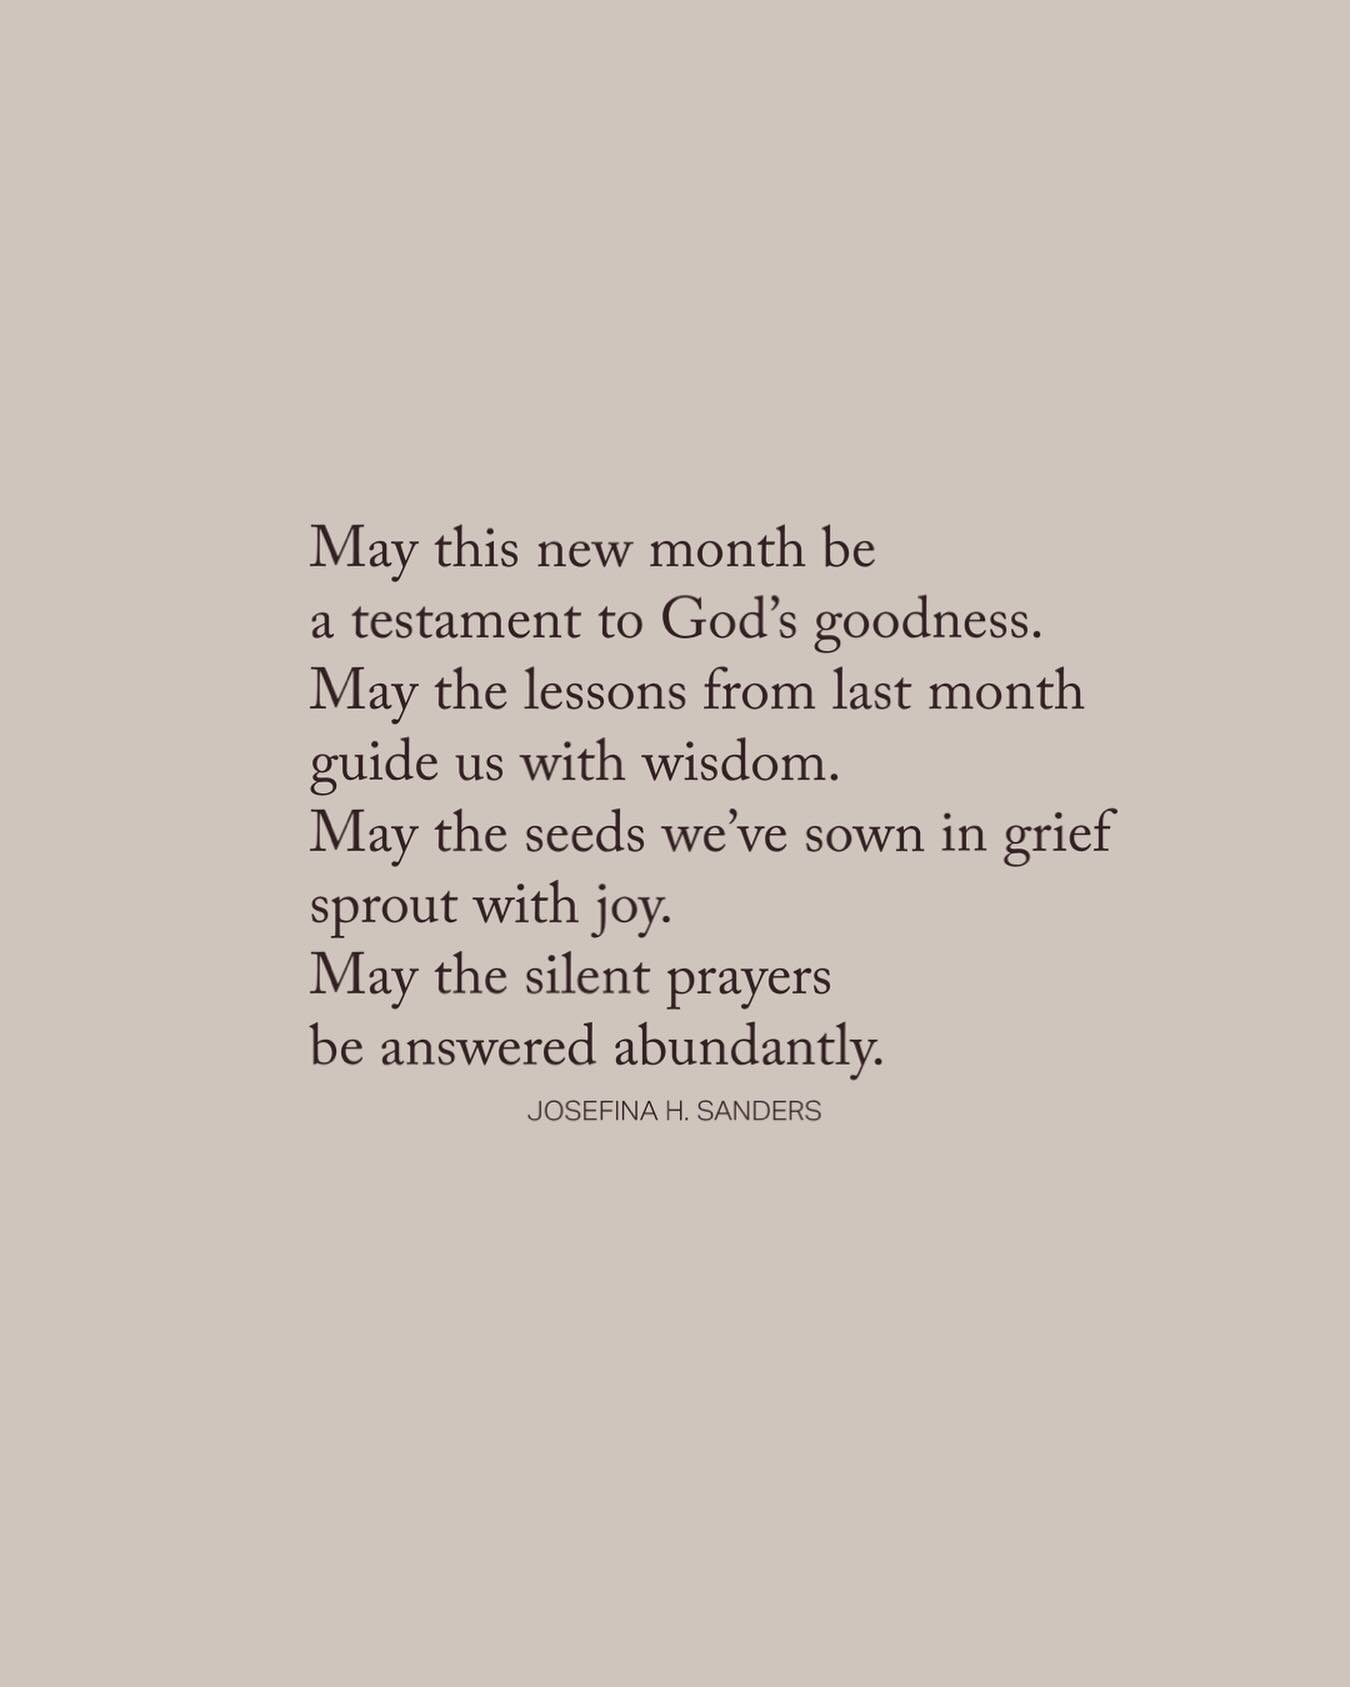 A new month prayer ✨

May this new month be full.
May the seeds we sowed in grief, sprout with joy.
May our silent prayers be answered exceedingly abundantly more than we&rsquo;ve asked or thought of.

May this new month be a testament of God&rsquo;s